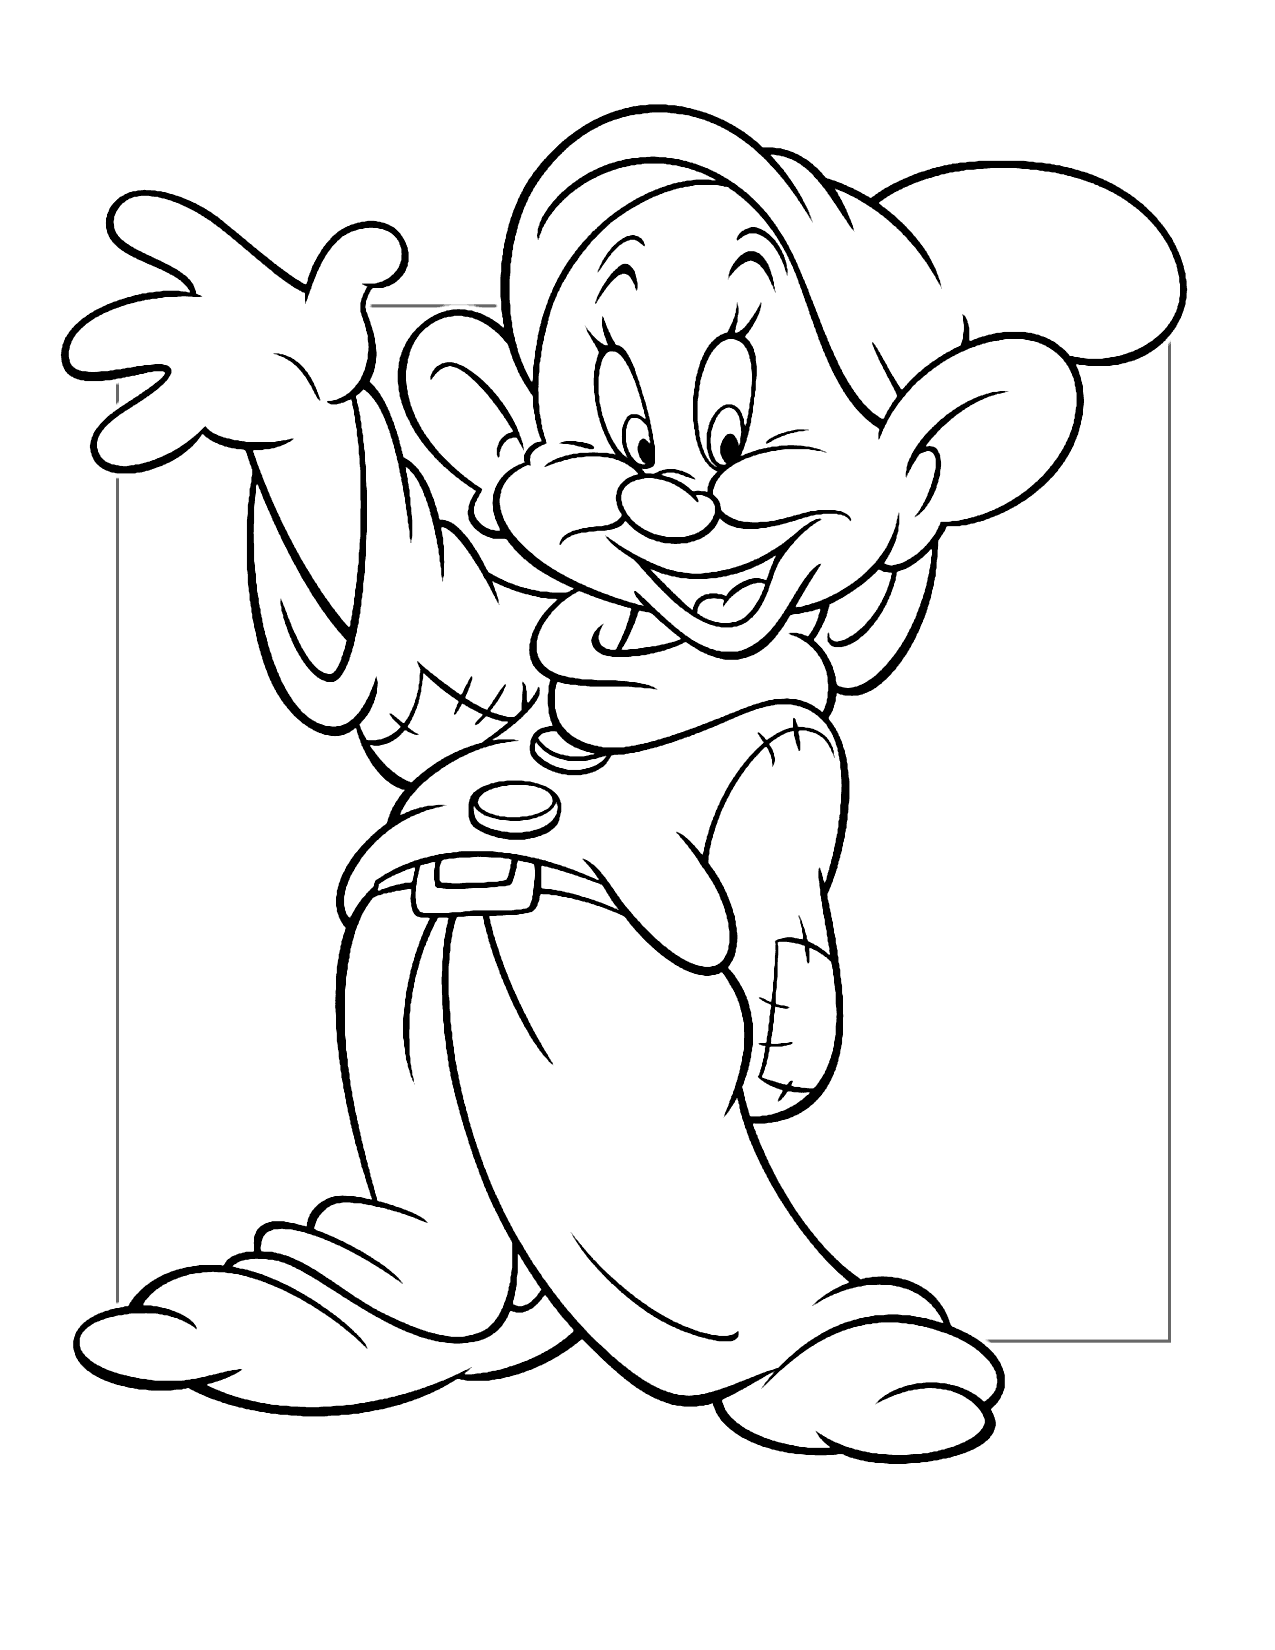 Dopey Dwarf Coloring Page